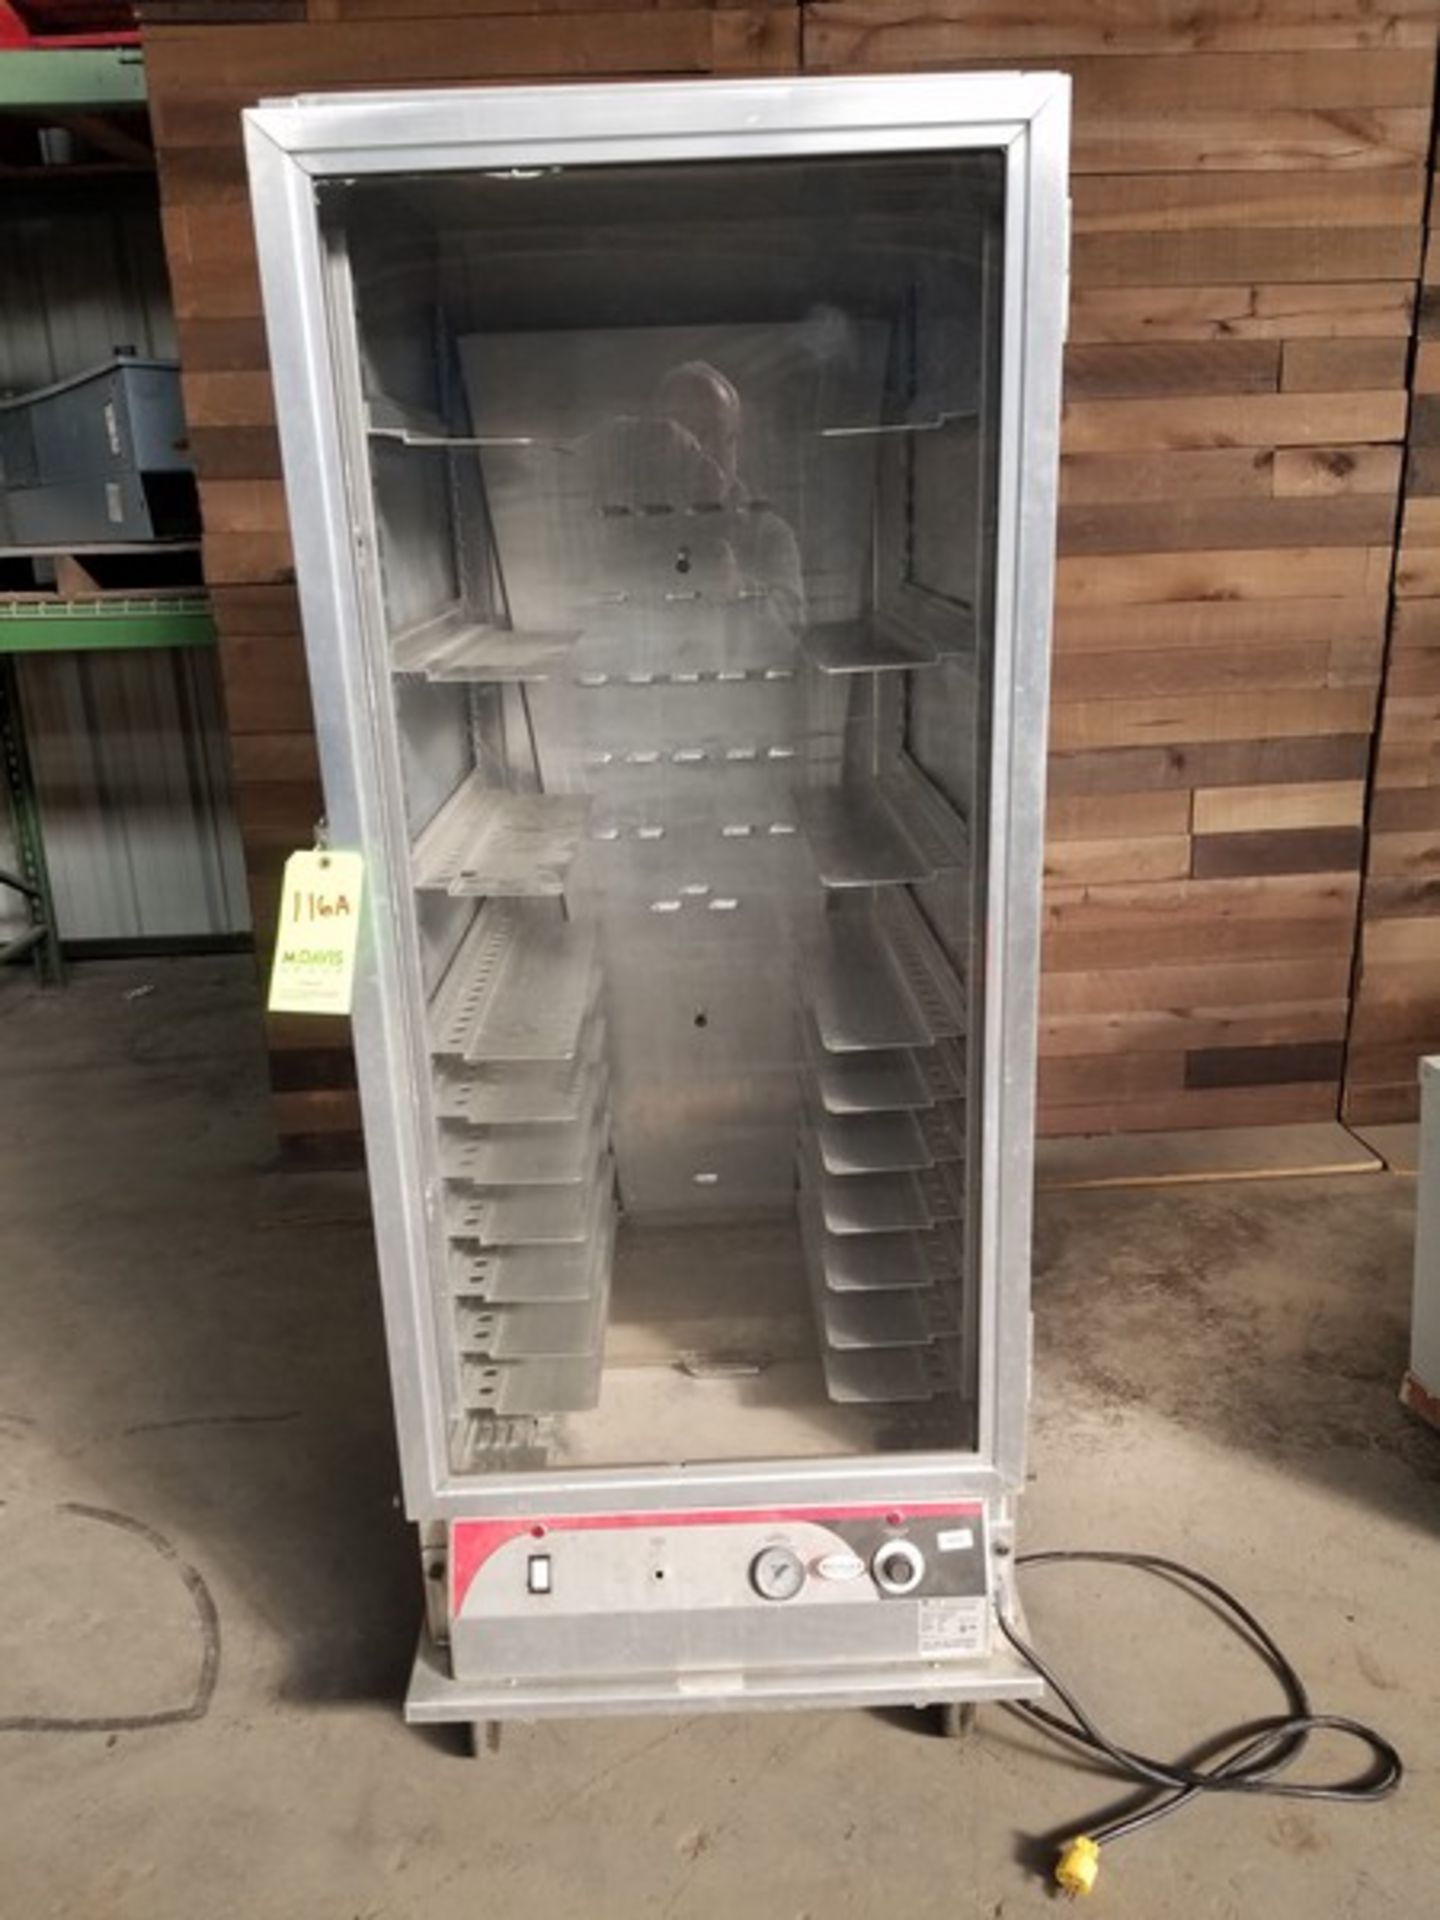 Bevles PHC70-MP17 proofing / hot cabinet, serial # 680310611001, volt 120, casters (Loading Fee $50